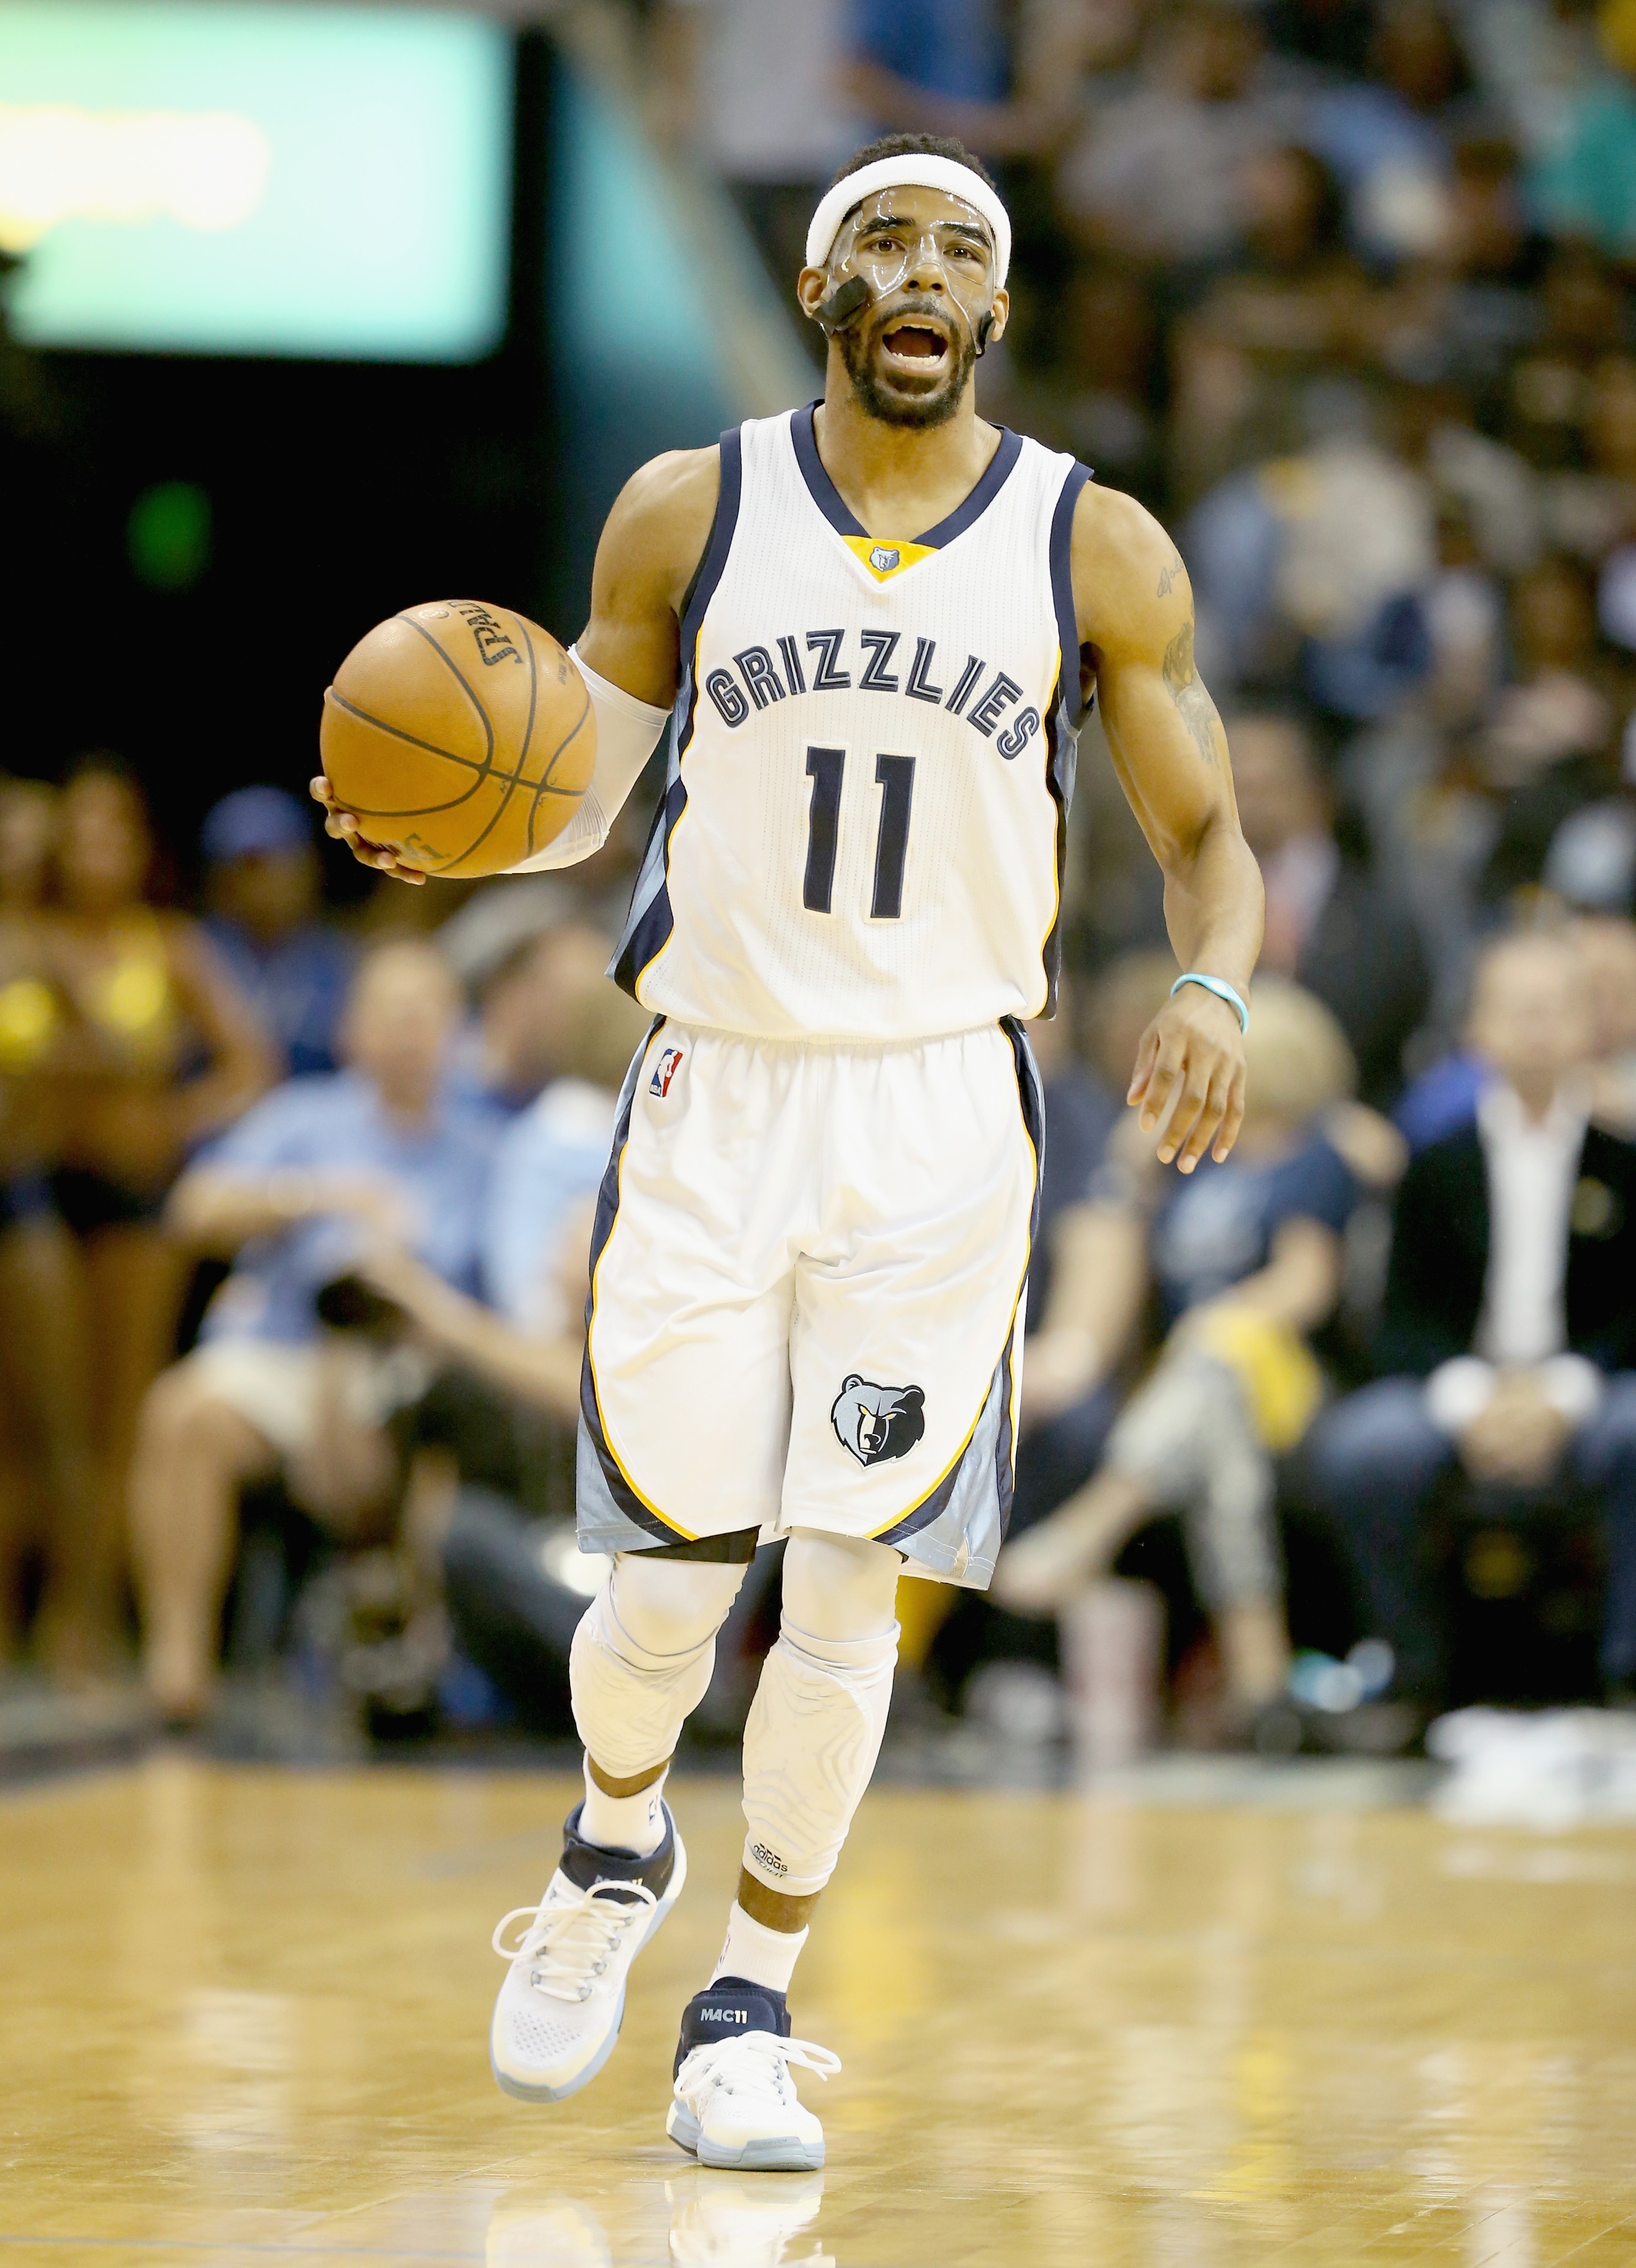 MEMPHIS, TN - MAY 15: Mike Conley #11 of the Memphis Grizzlies dribbles the ball against the Golden State Warriors during Game six of the Western Conference Semifinals of the 2015 NBA Playoffs at FedExForum on May 15, 2015 in Memphis, Tennessee.  NOTE TO USER: User expressly acknowledges and agrees that, by downloading and or using this photograph, User is consenting to the terms and conditions of the Getty Images License Agreement  (Photo by Andy Lyons/Getty Images)